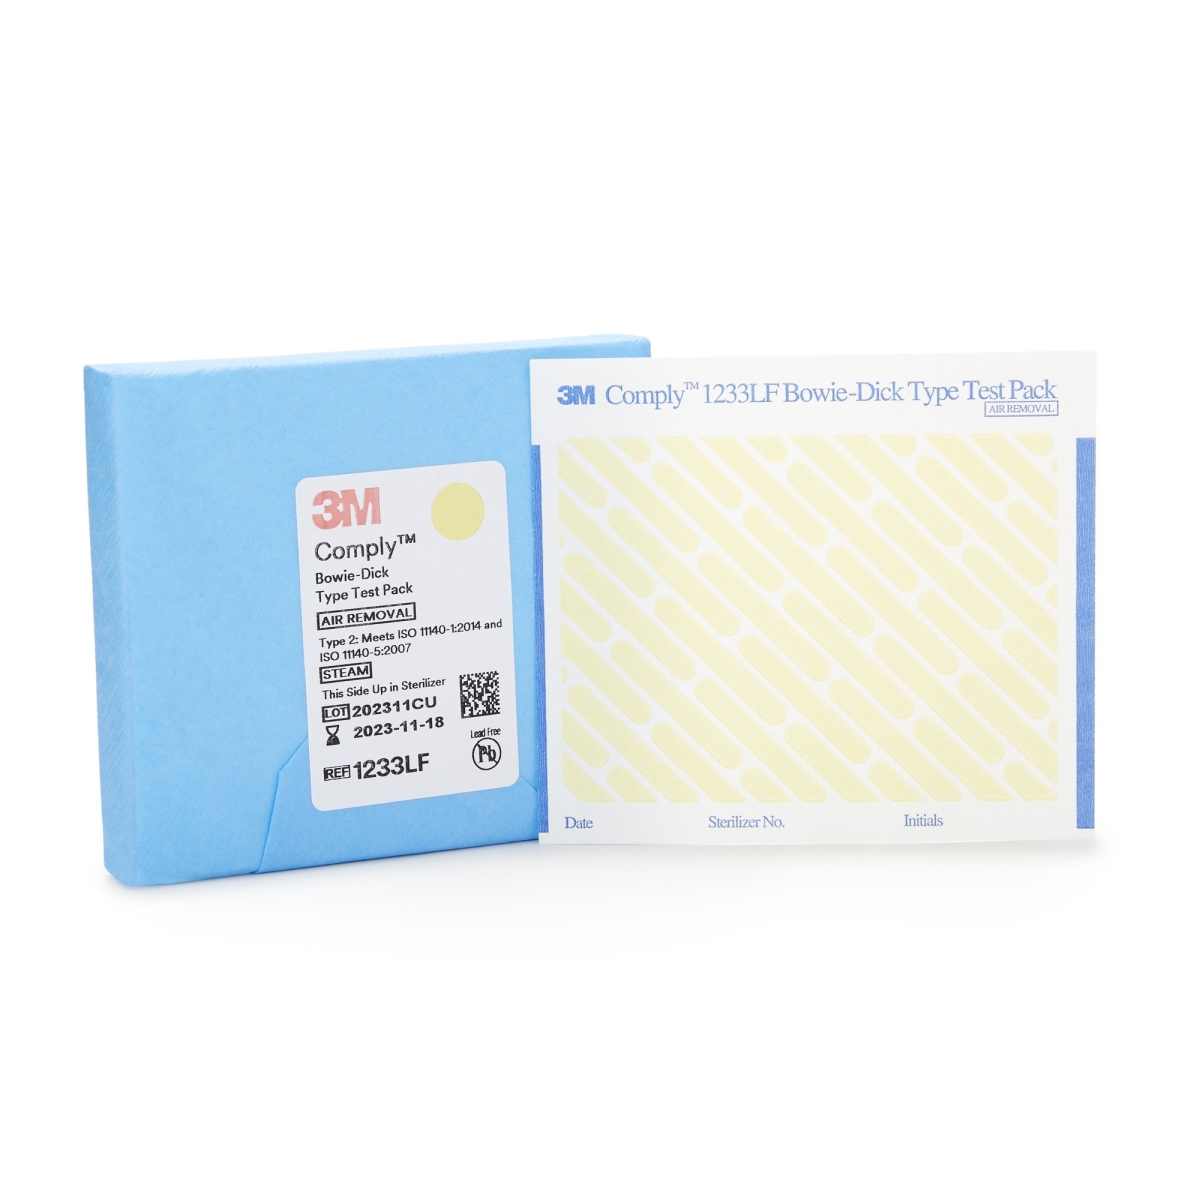 Picture of 3M 724430-BG Comply Sterilization Bowie-Dick Test Pack - Type 2 - Steam - 270 to 273F - Disposable - 6 per Bag - 5 Bag per Case